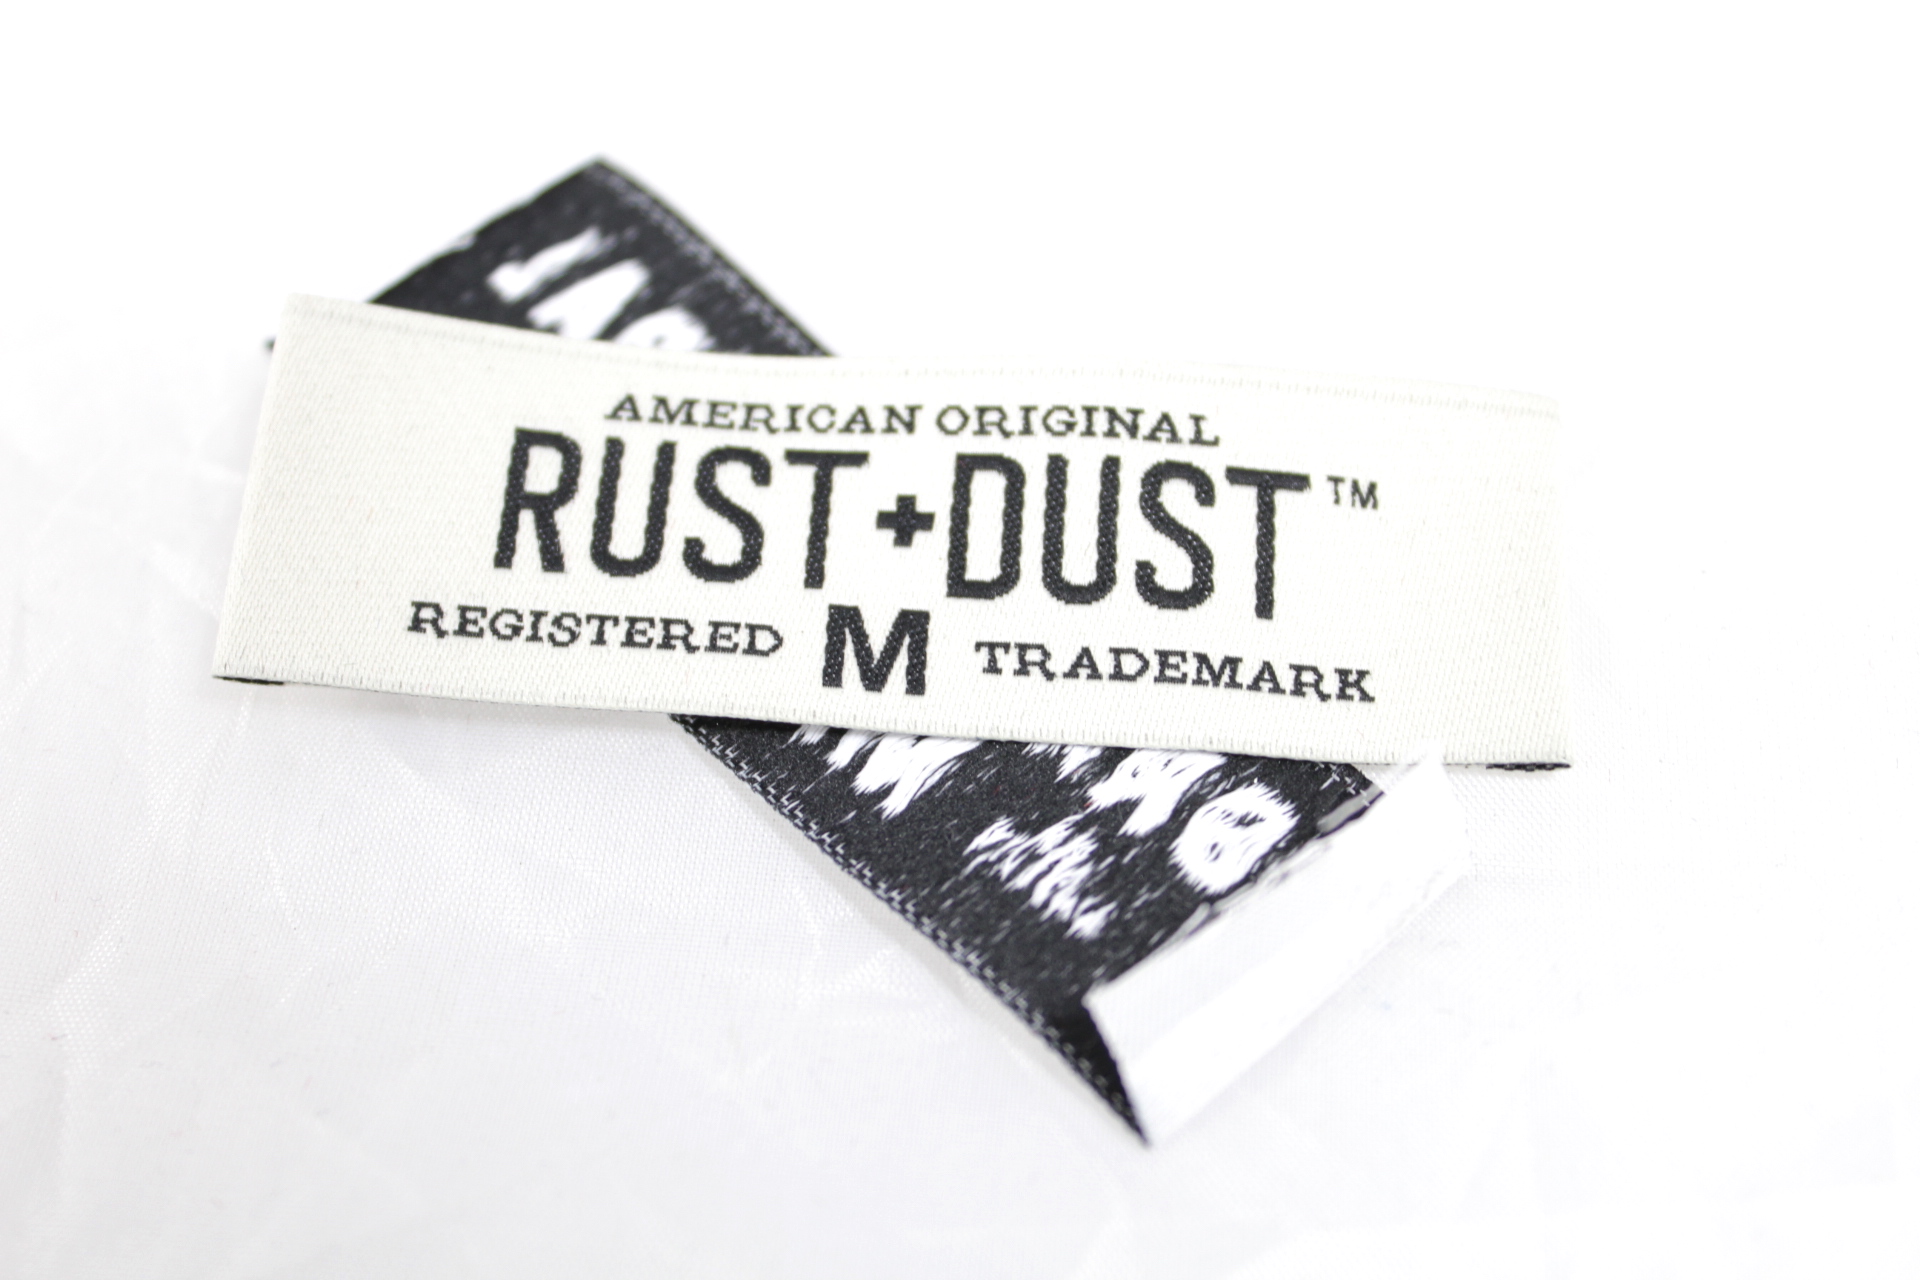 Rust + Dust woven white woven label